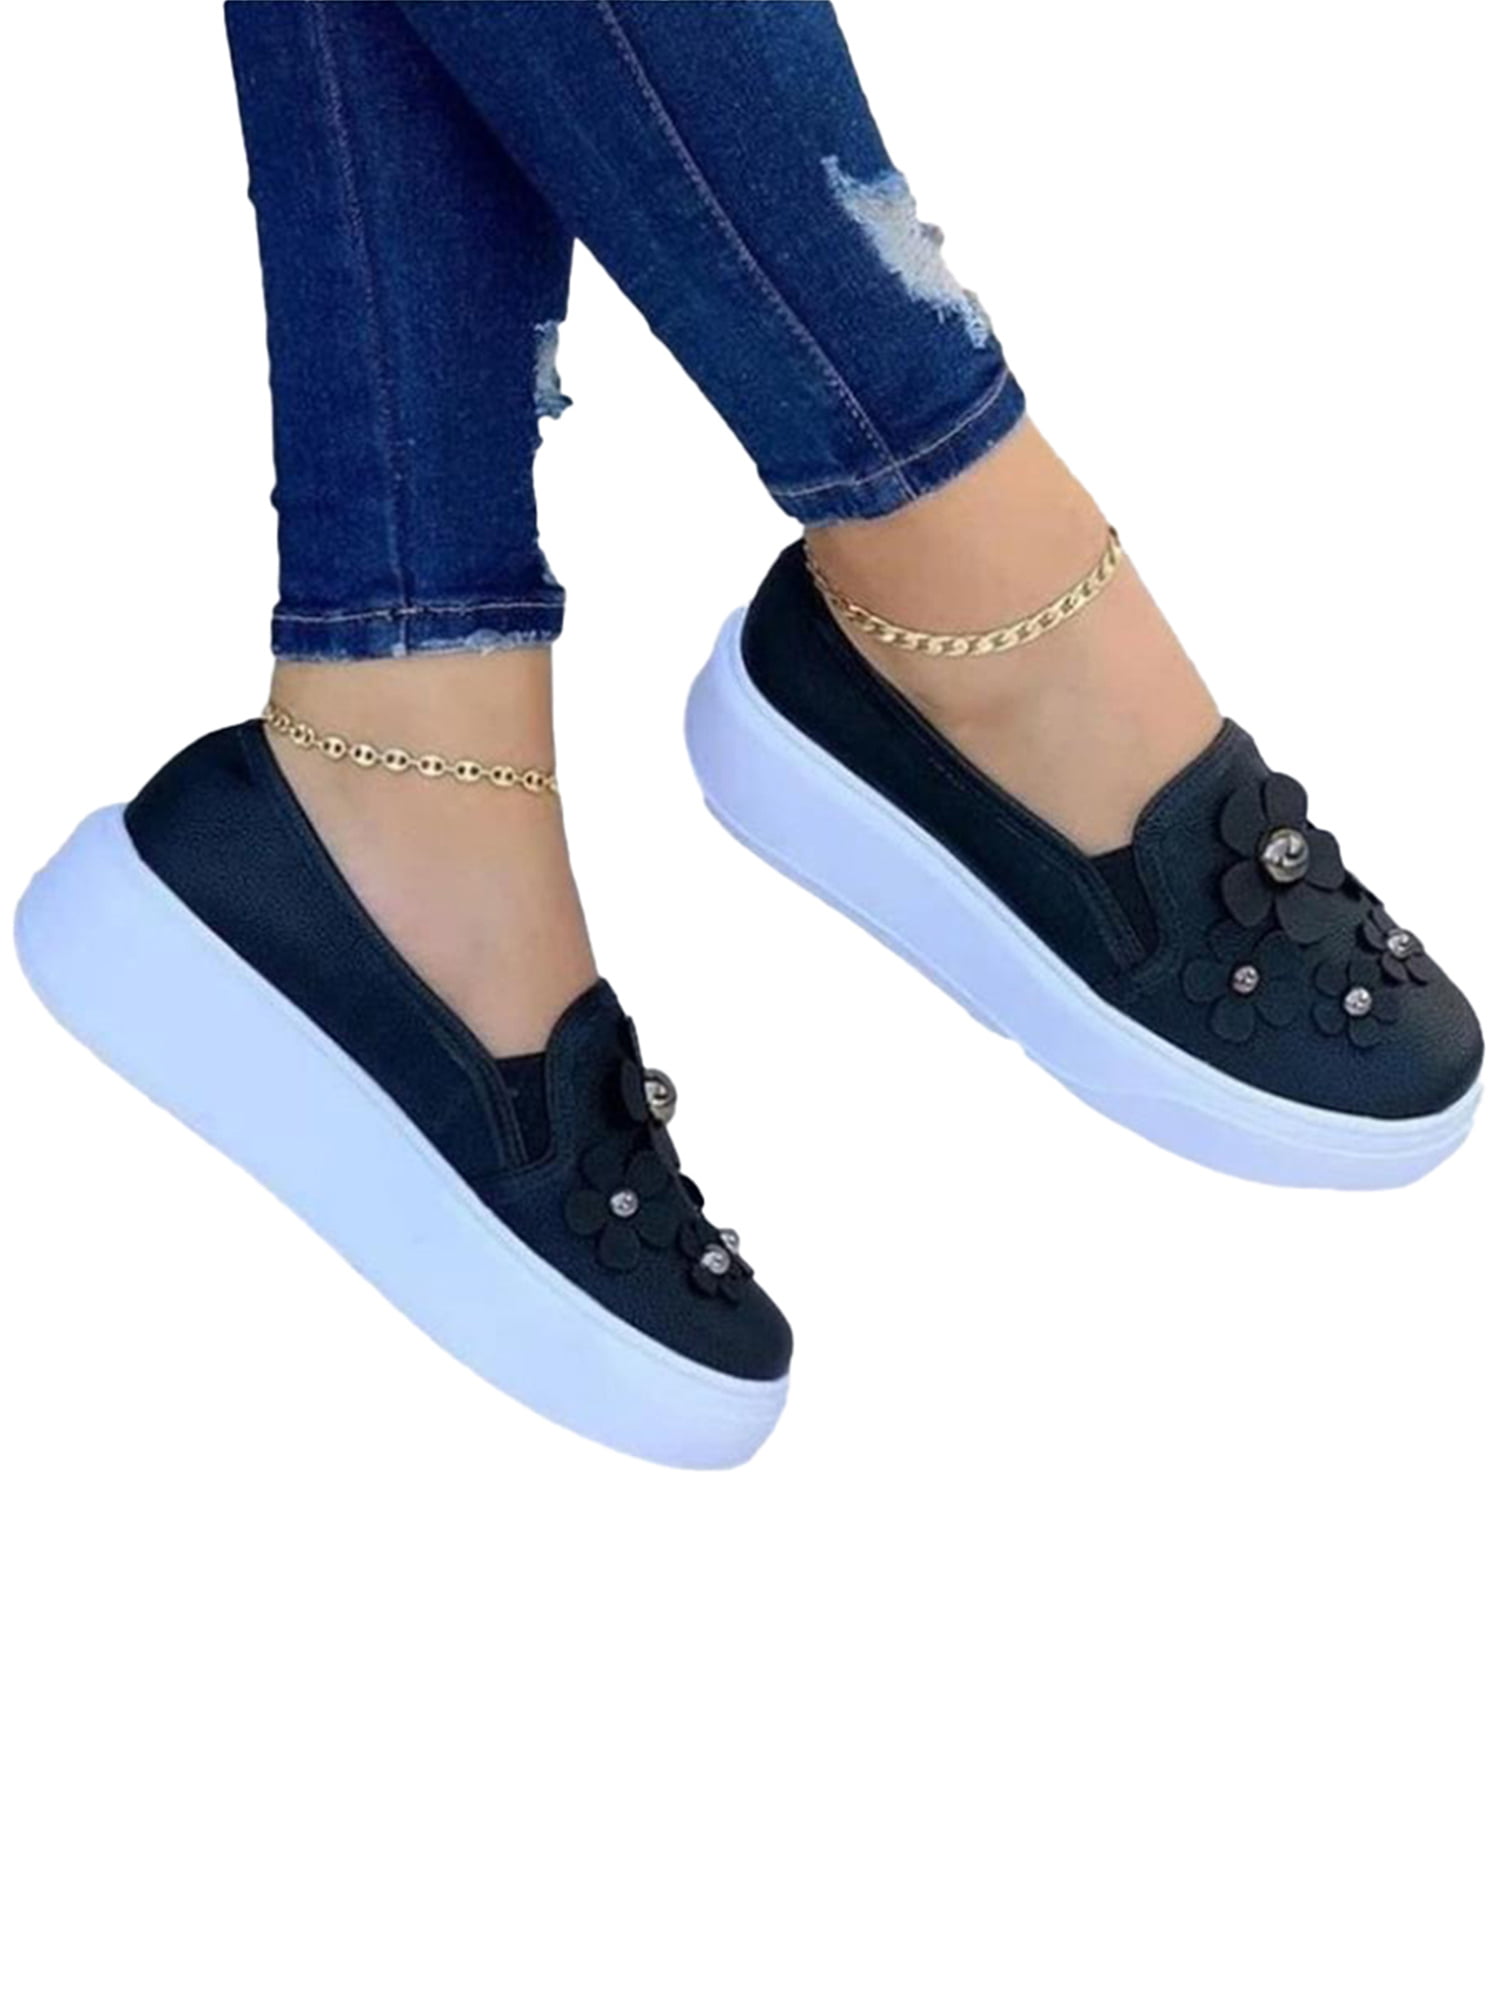 Womens Slip On Pumps Trainers Loafers Ladies Casual Flat Sport Shoes Sneakers